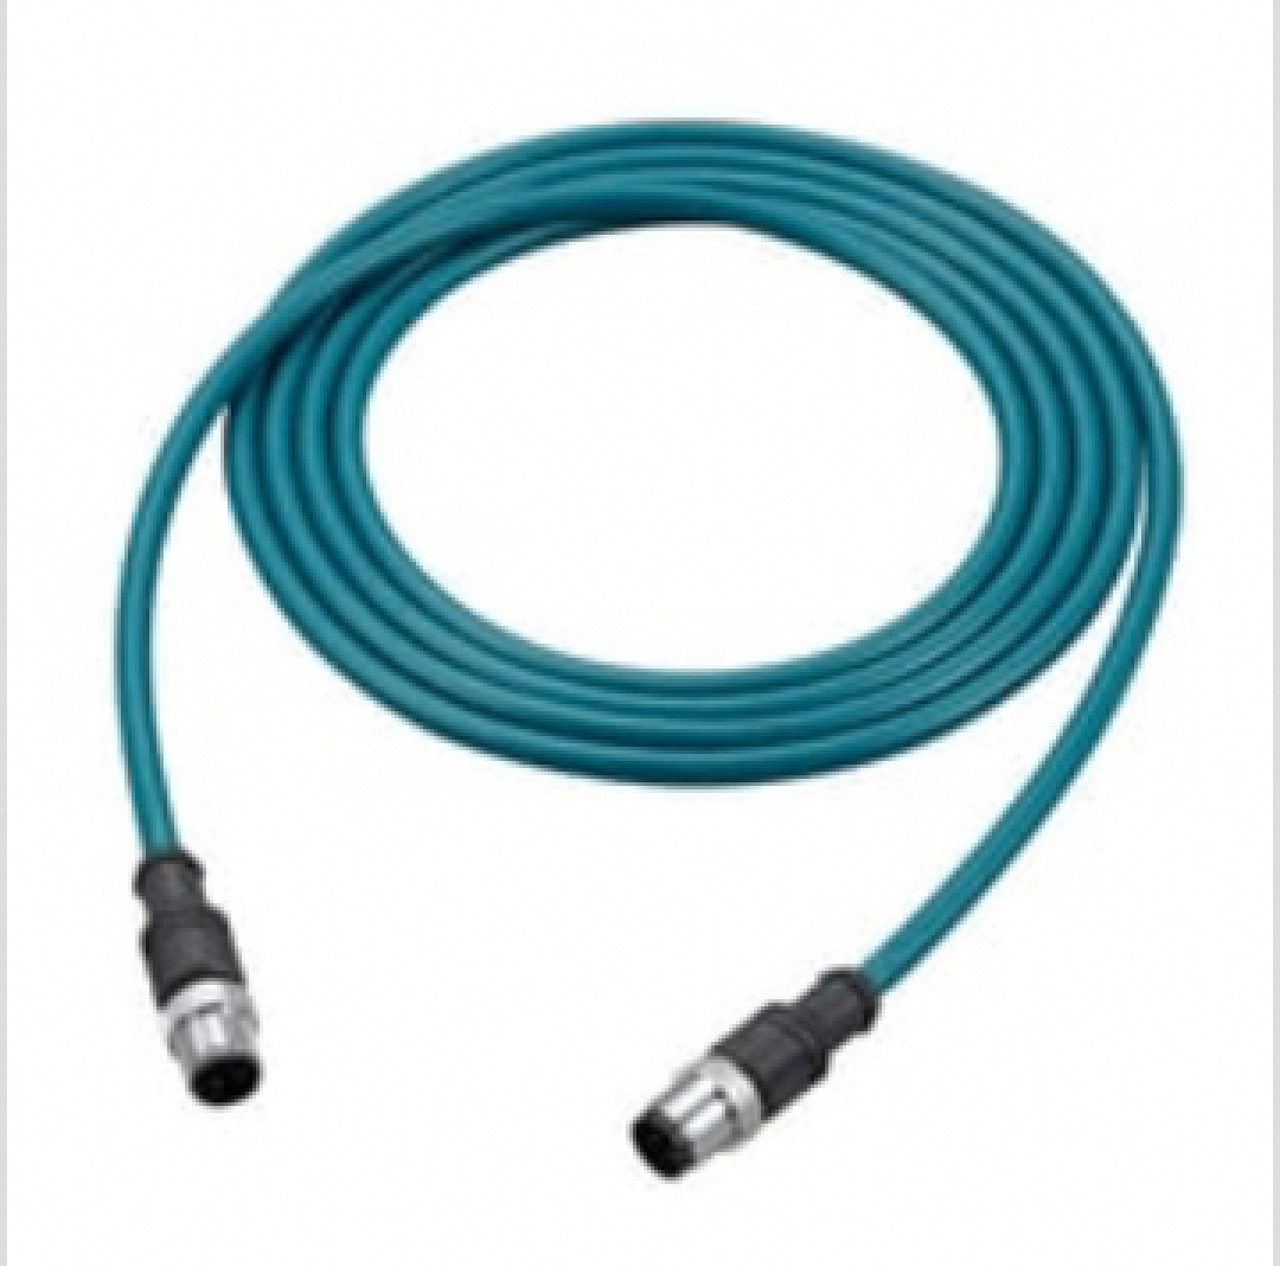 Keyence OP-87459 Ethernet Cable (M12 4-pin / RJ45), NFPA79, Straight Cable, 10 m [Refurbished]